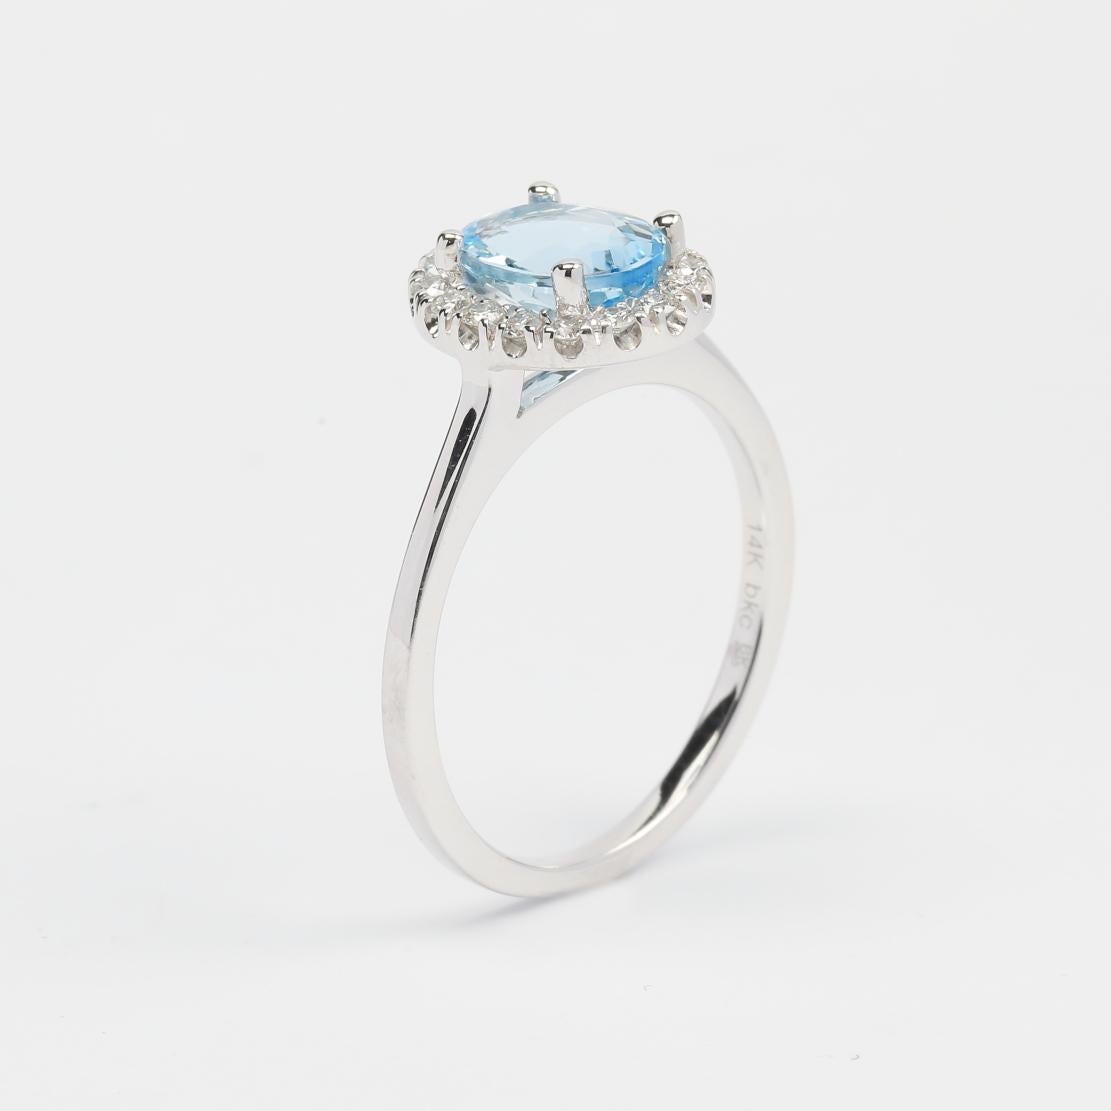 Beautiful and classy Brazilian Aquamarine and Diamonds Cocktail Ring, featuring:
✧ 1.22 tcw Brazilian Brazilian Aquamarine
✧ diamond halo set with natural diamonds weighing approx. 0.22 tcw  (F-G color, VS clarity)
✧ Free appraisal included with